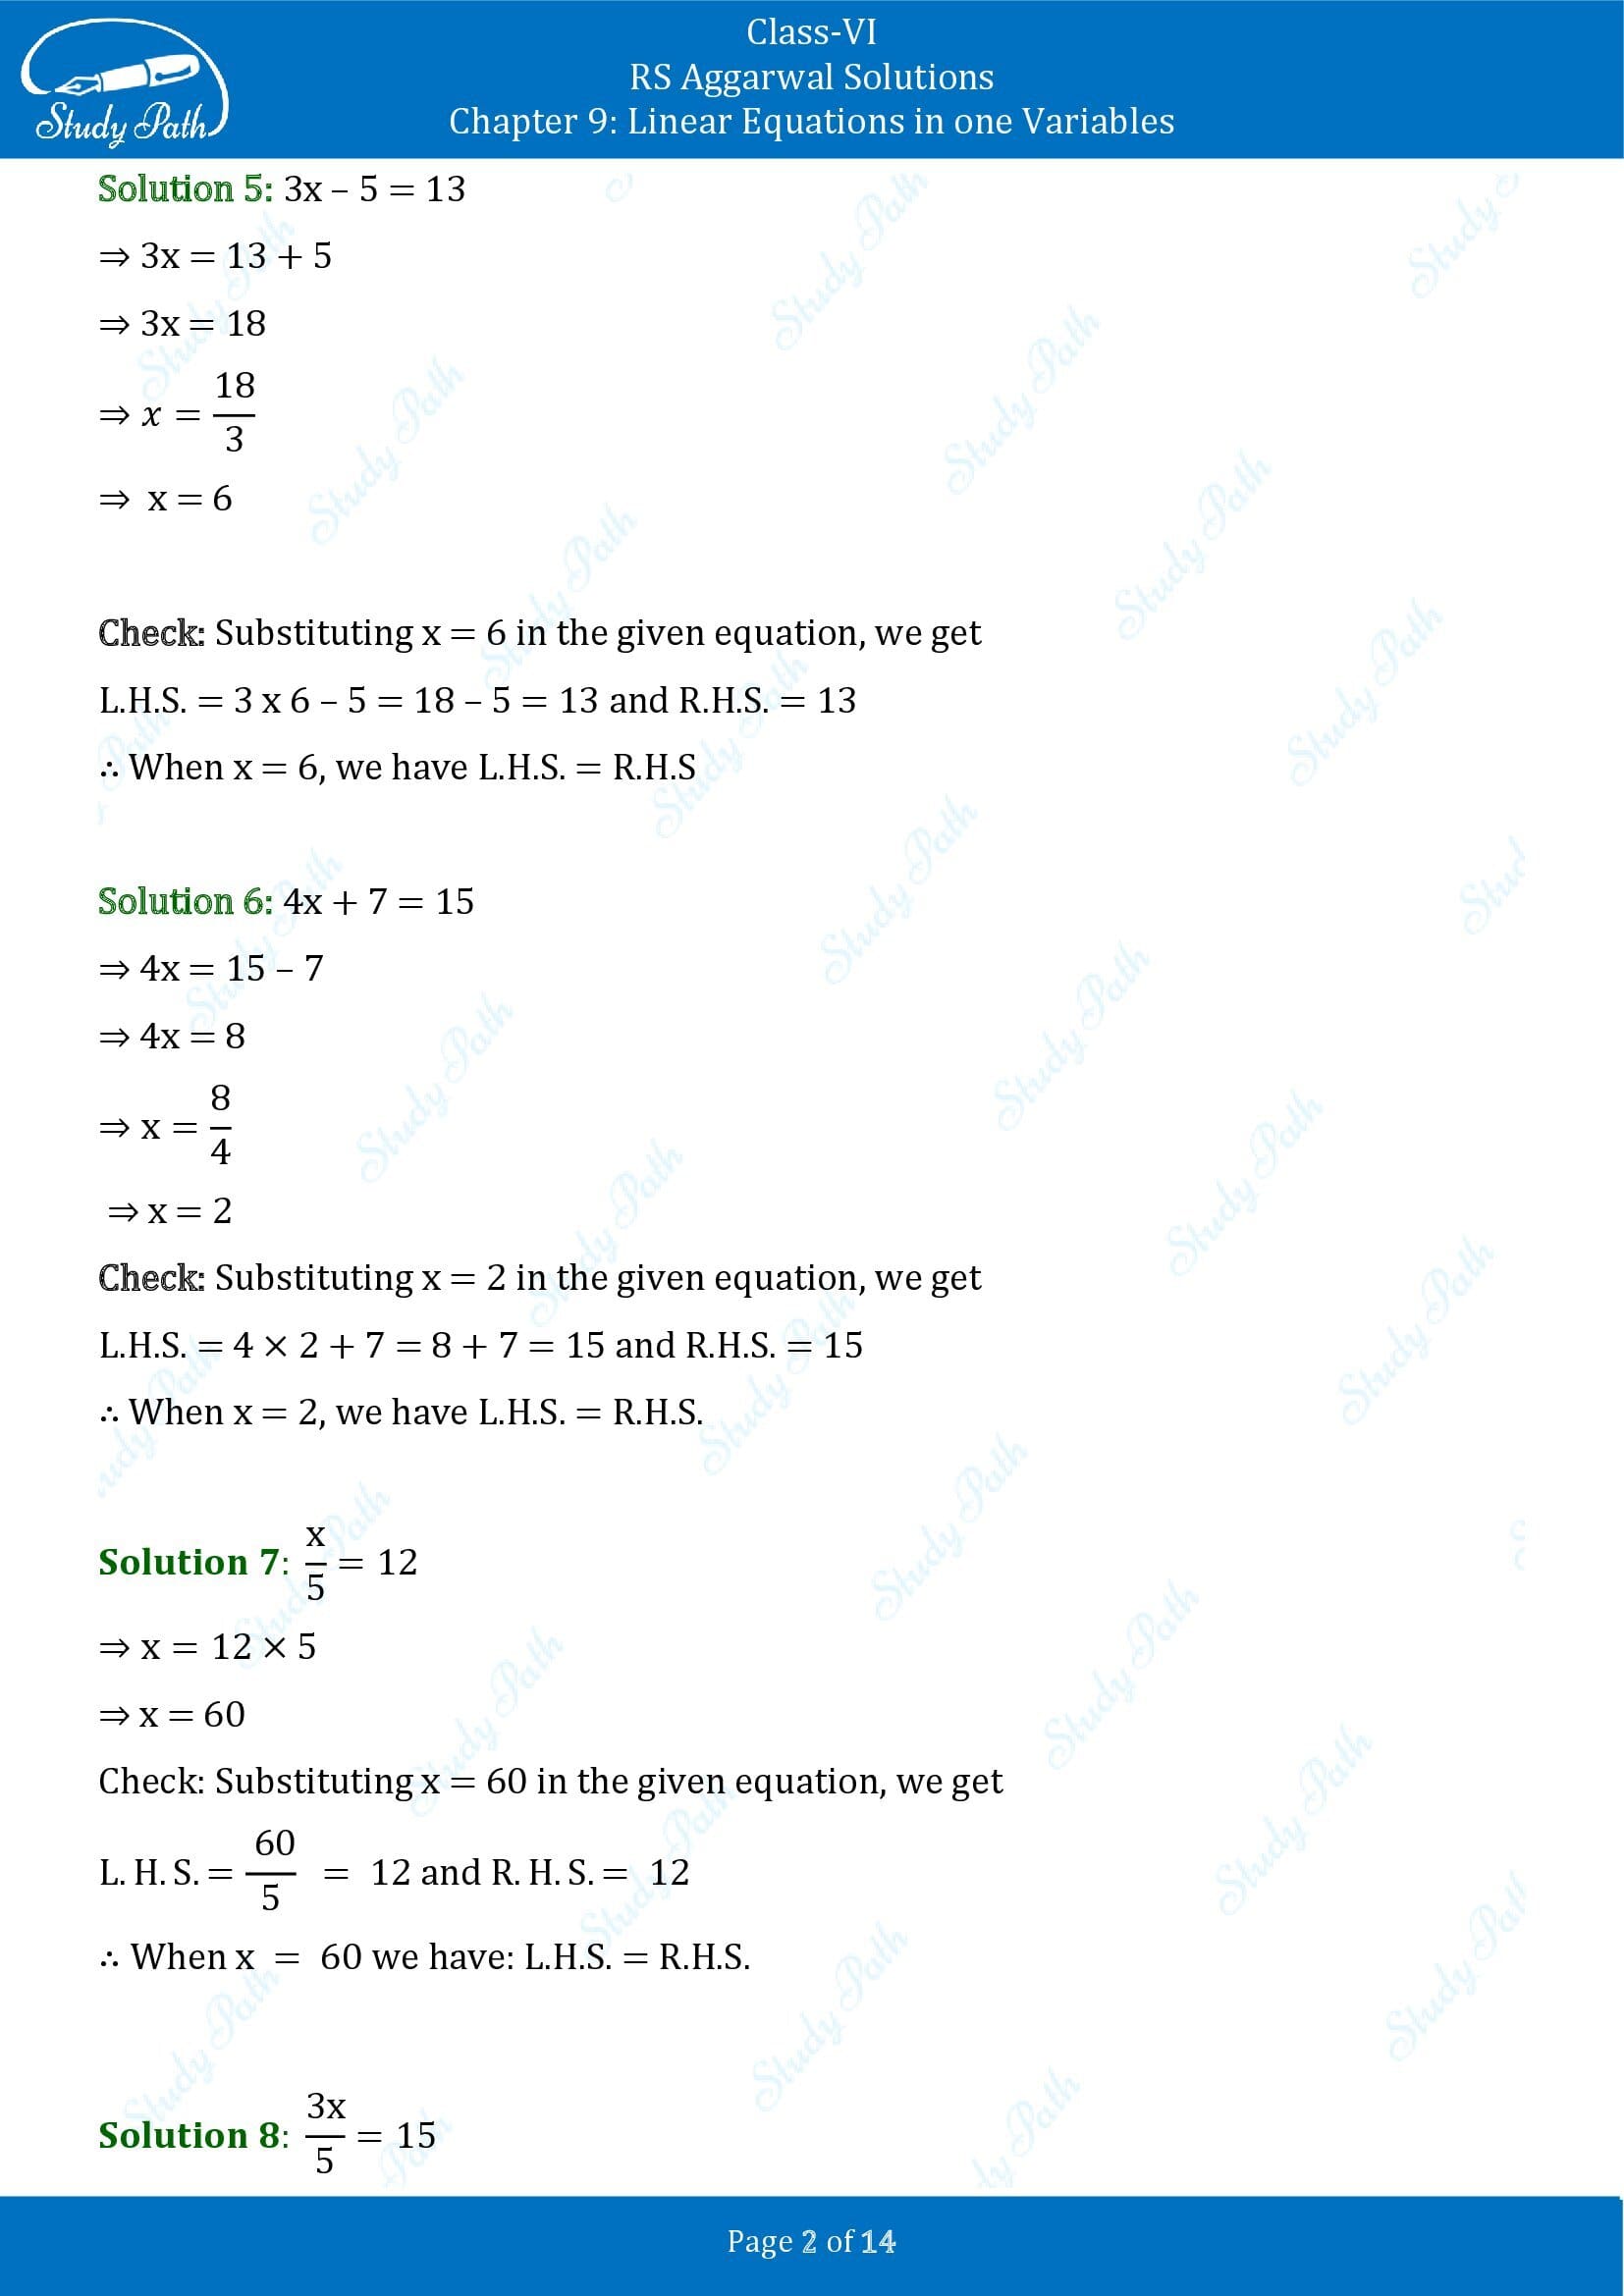 RS Aggarwal Solutions Class 6 Chapter 9 Linear Equations in One Variable Exercise 9B 00002